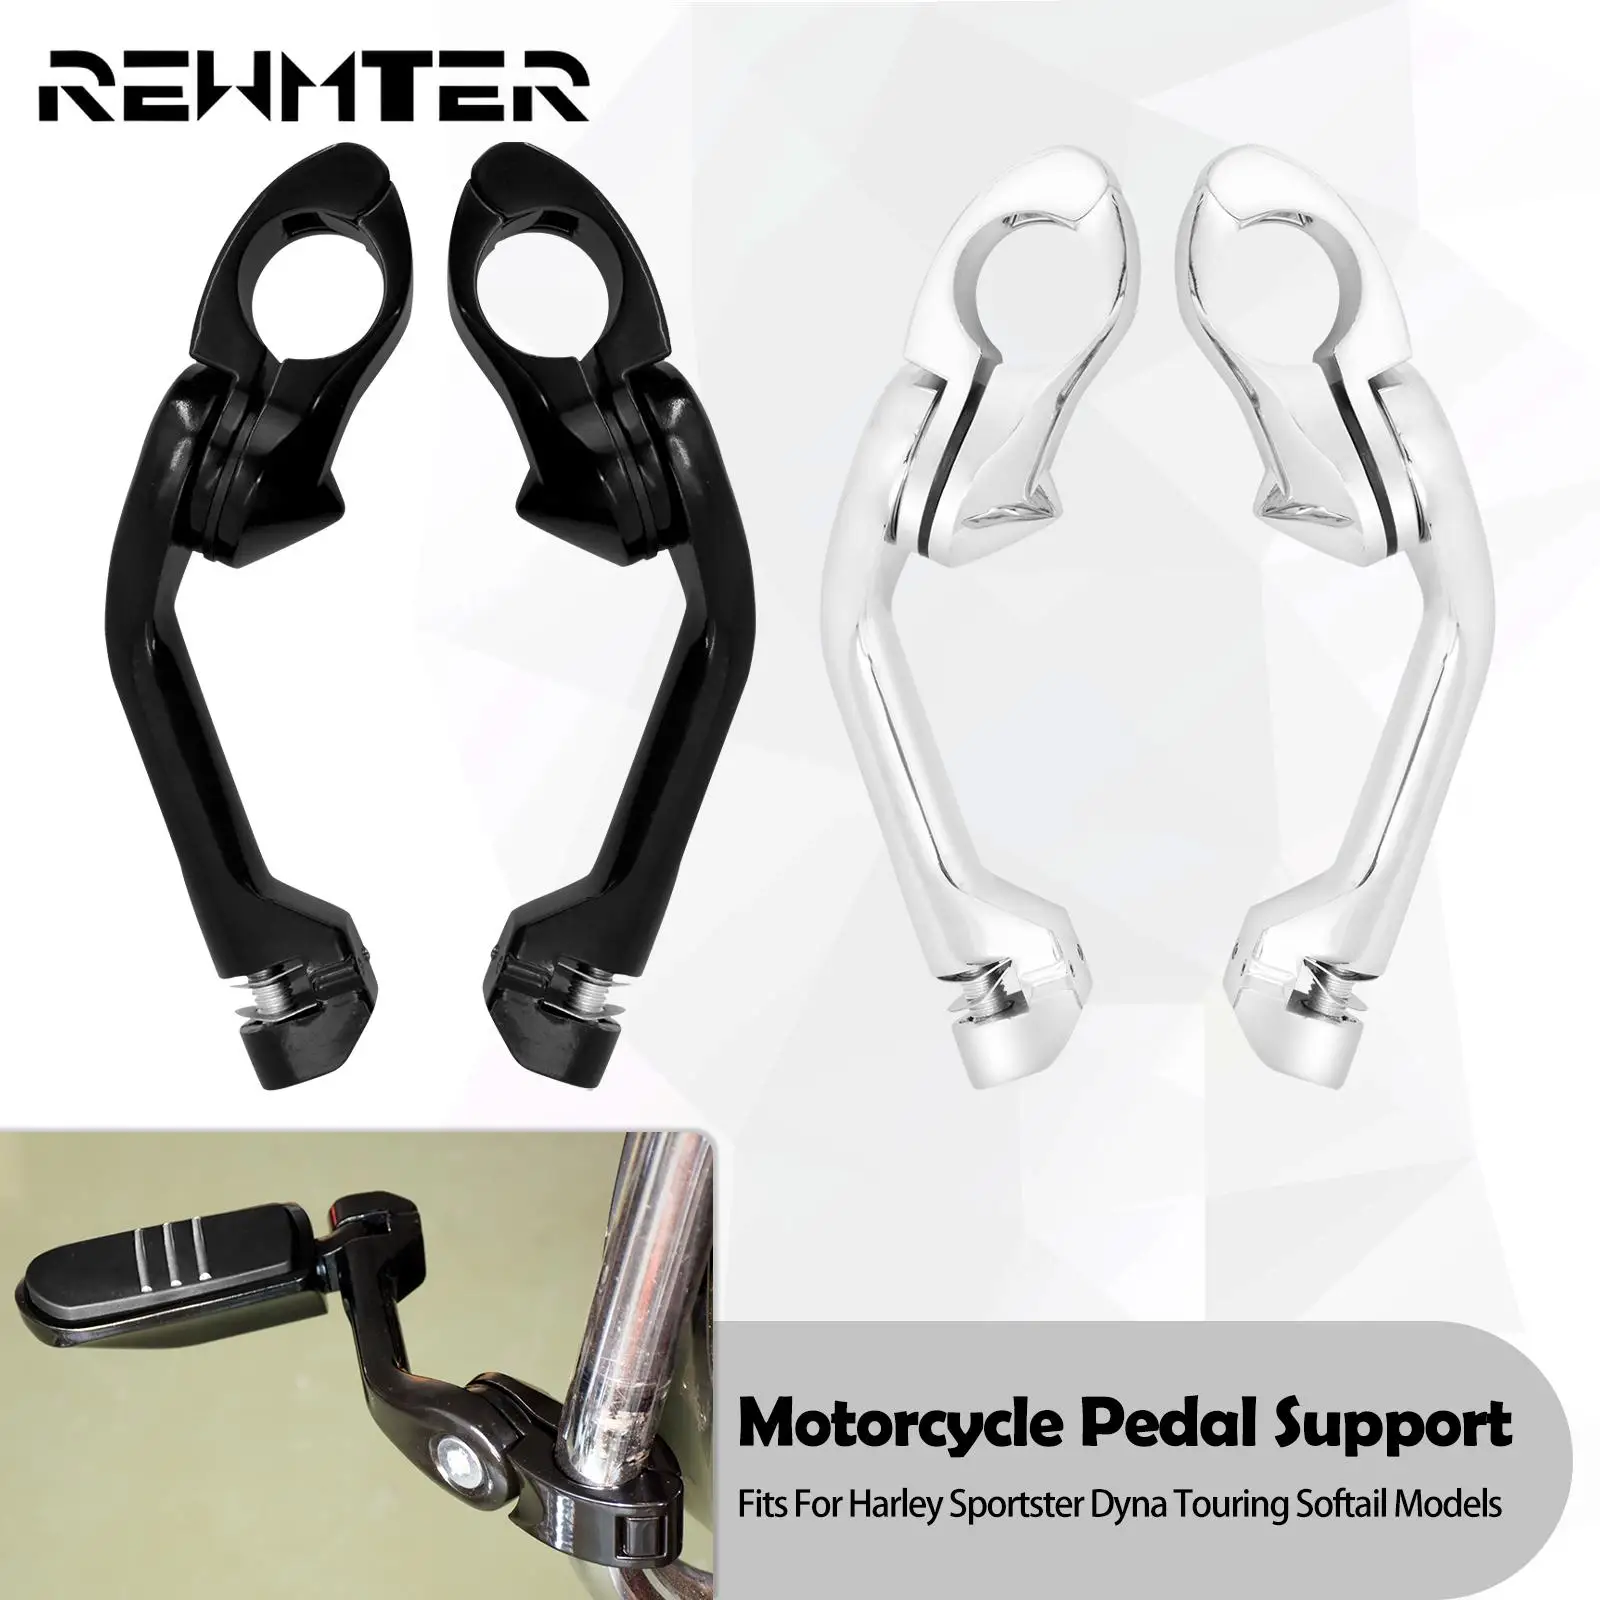 M highway footpeg mount 1 25 engine guards pegs clamp support for harley dyna sportster thumb200